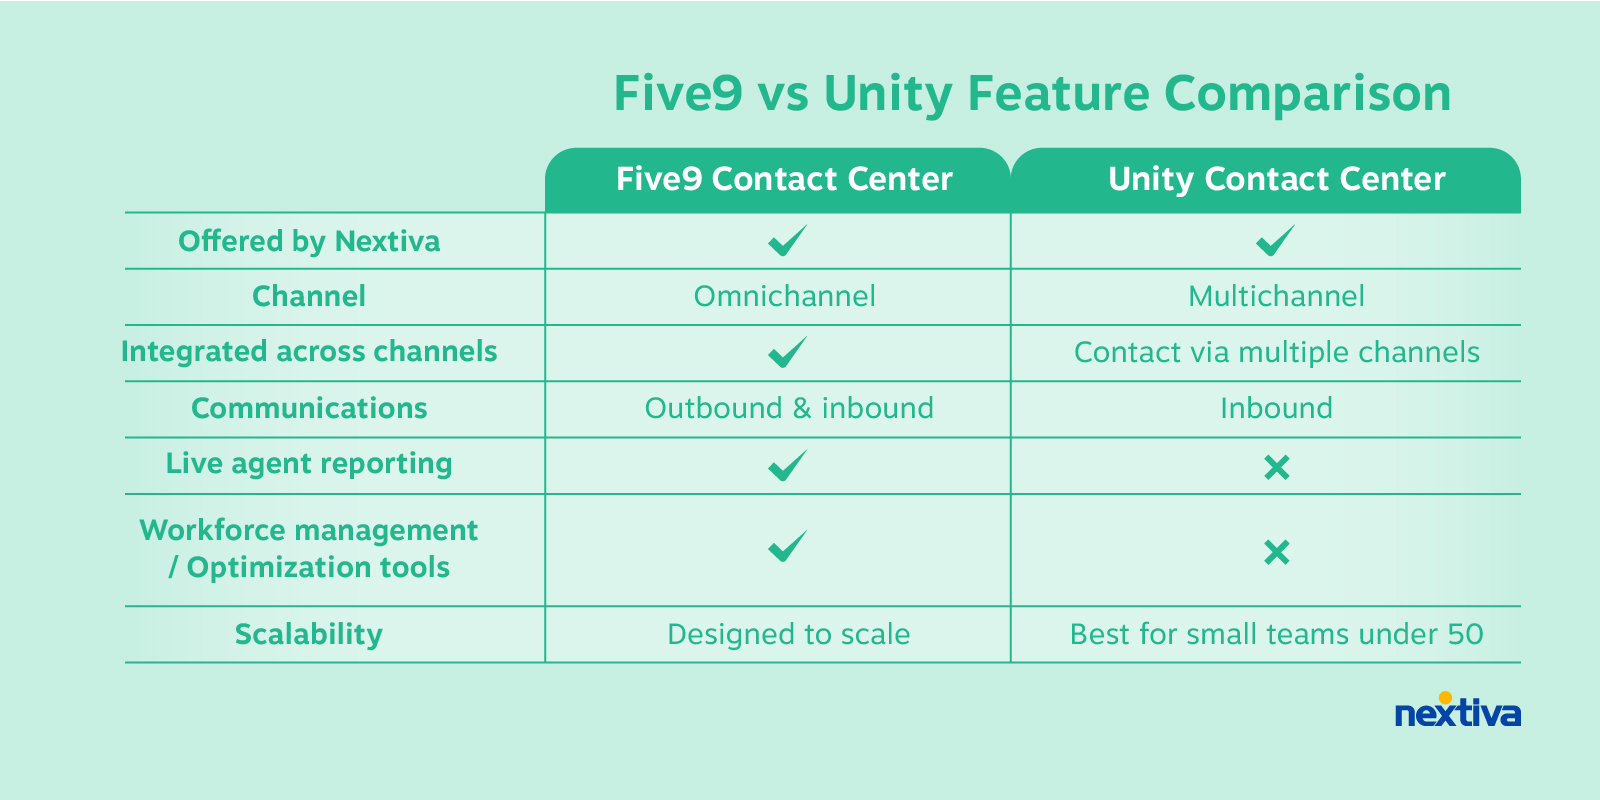 Five9 vs Unity Contact center - Offered by Nextiva Omnichannel  Conversations integrated across channels Outbound and inbound communications Live agent reporting Workforce management or optimization tools included Designed to scale